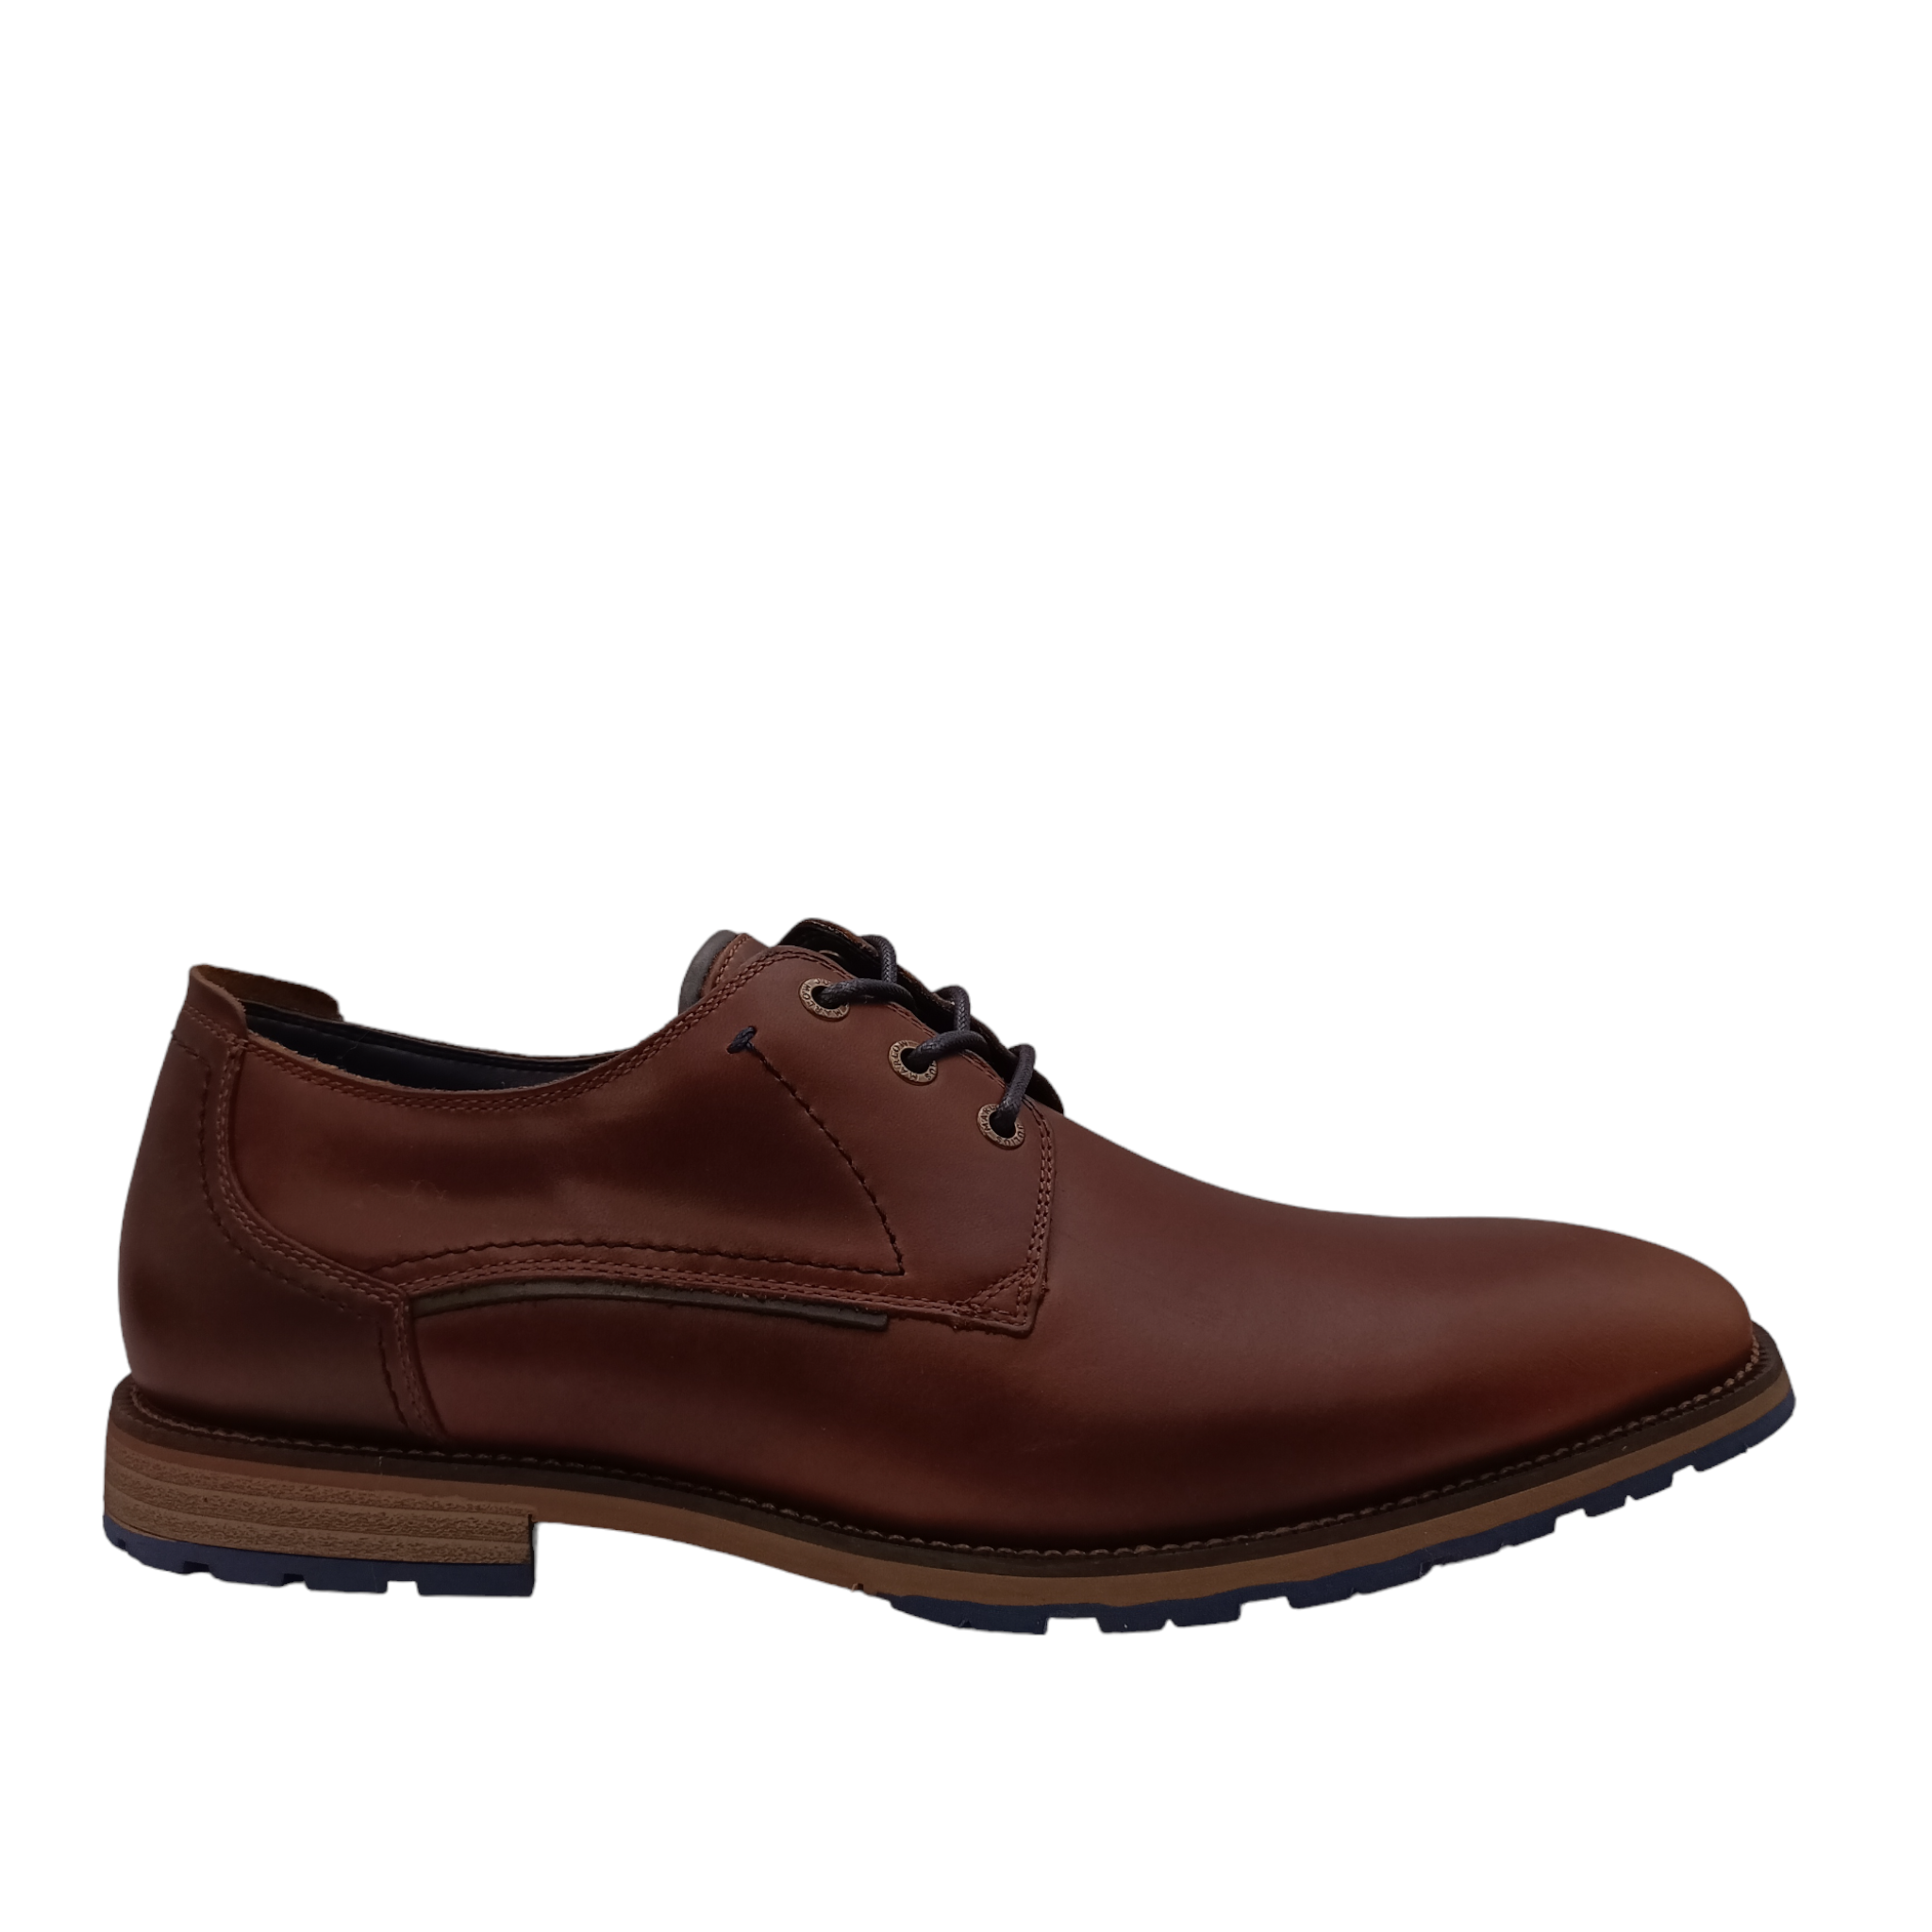 Shop Render Julius Marlow - with shoe&me - from Julius Marlow - Shoes - Mens, Shoe, Winter